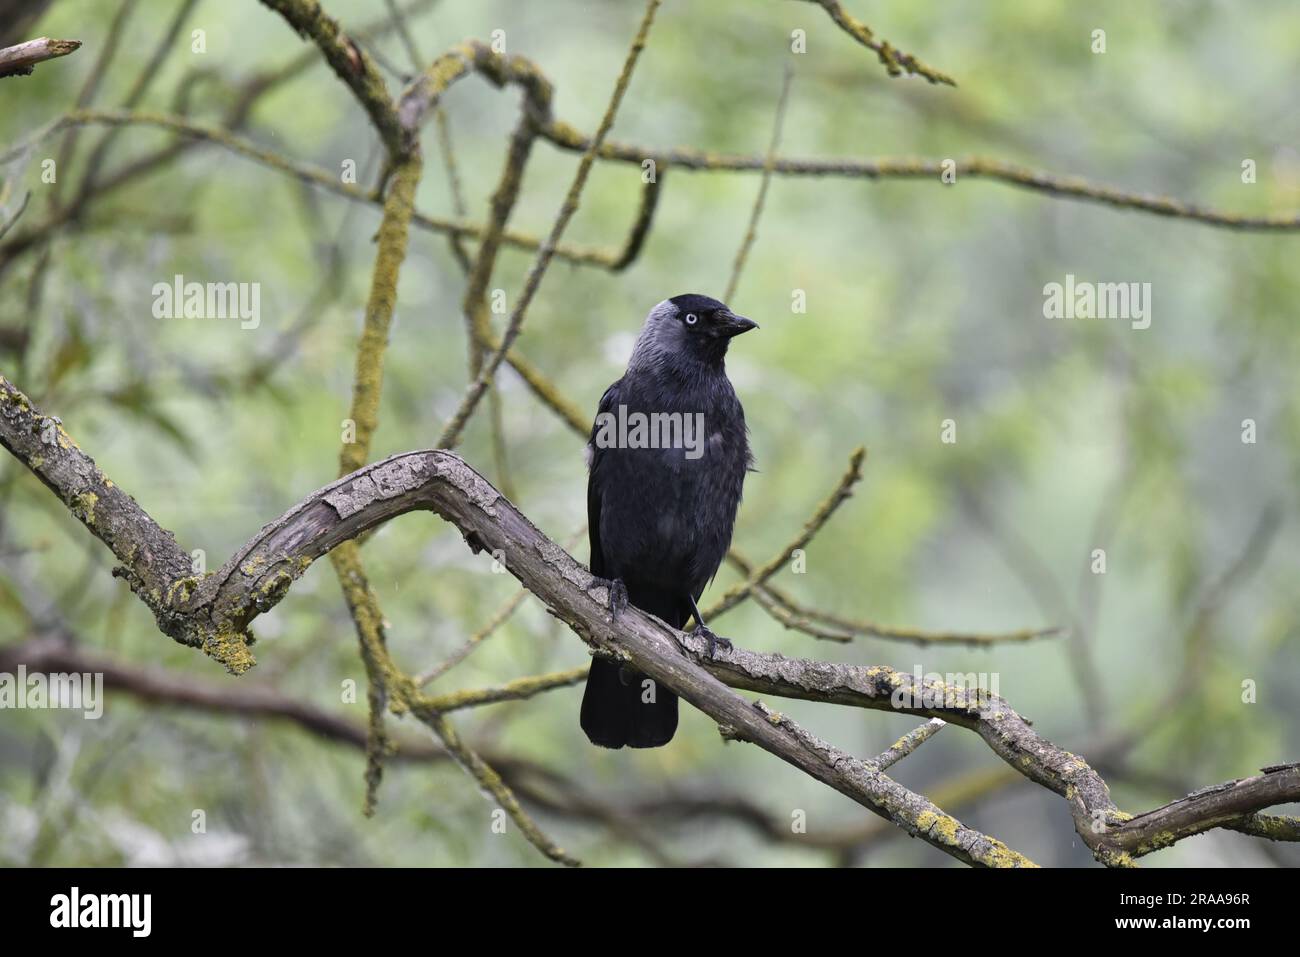 Western Jackdaw (Corvus monedula) Perched on a Tree Branch Facing Camera in Foreground of Image, Head Turned to Right, against a Green Background Stock Photo